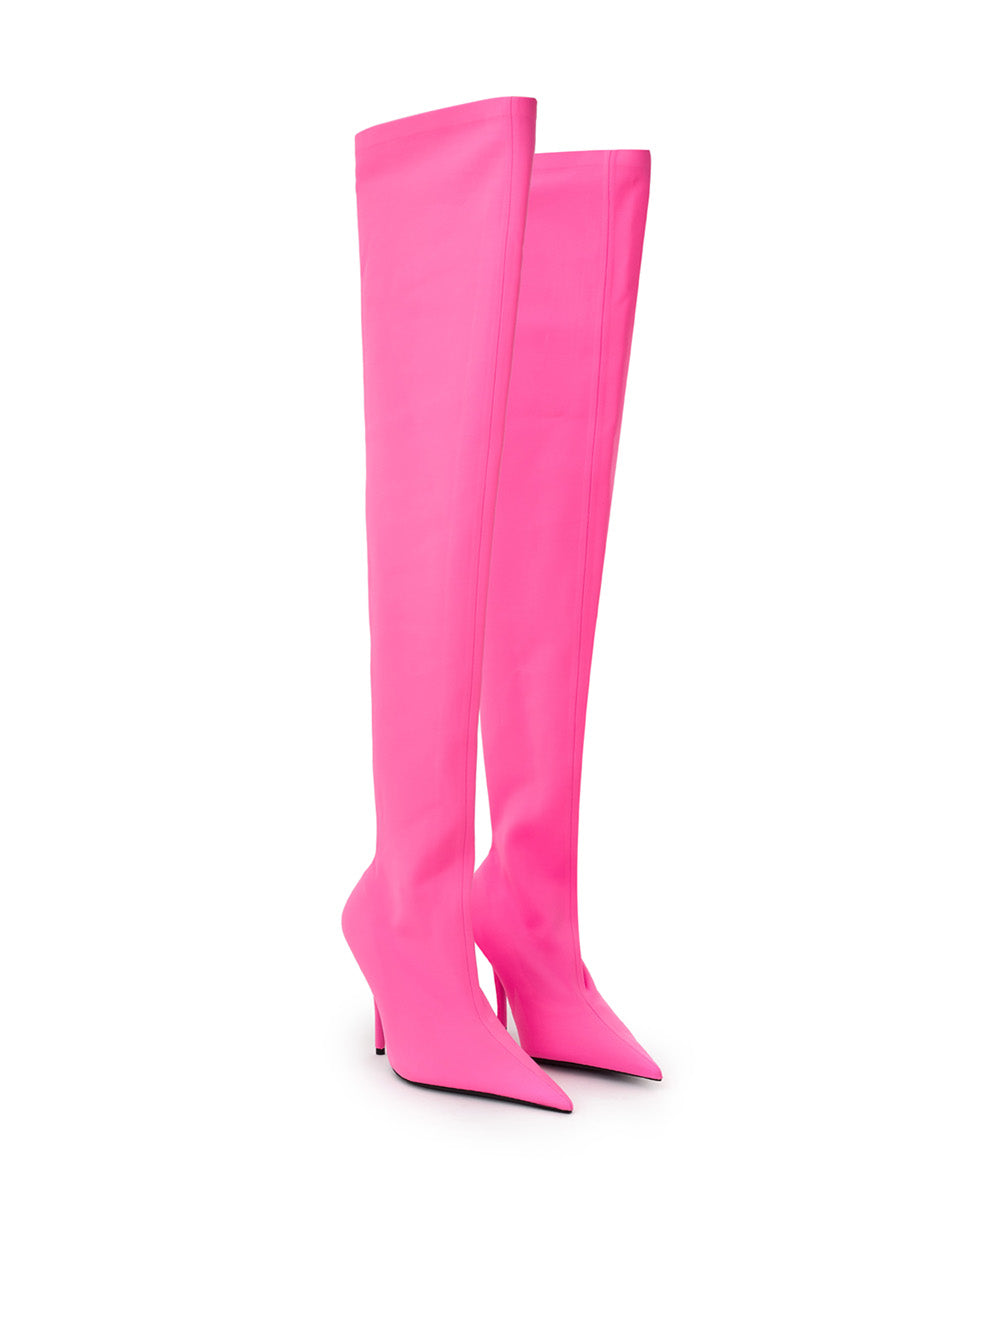 Knife Balenciaga Fluo Pink Over The Knee Boot